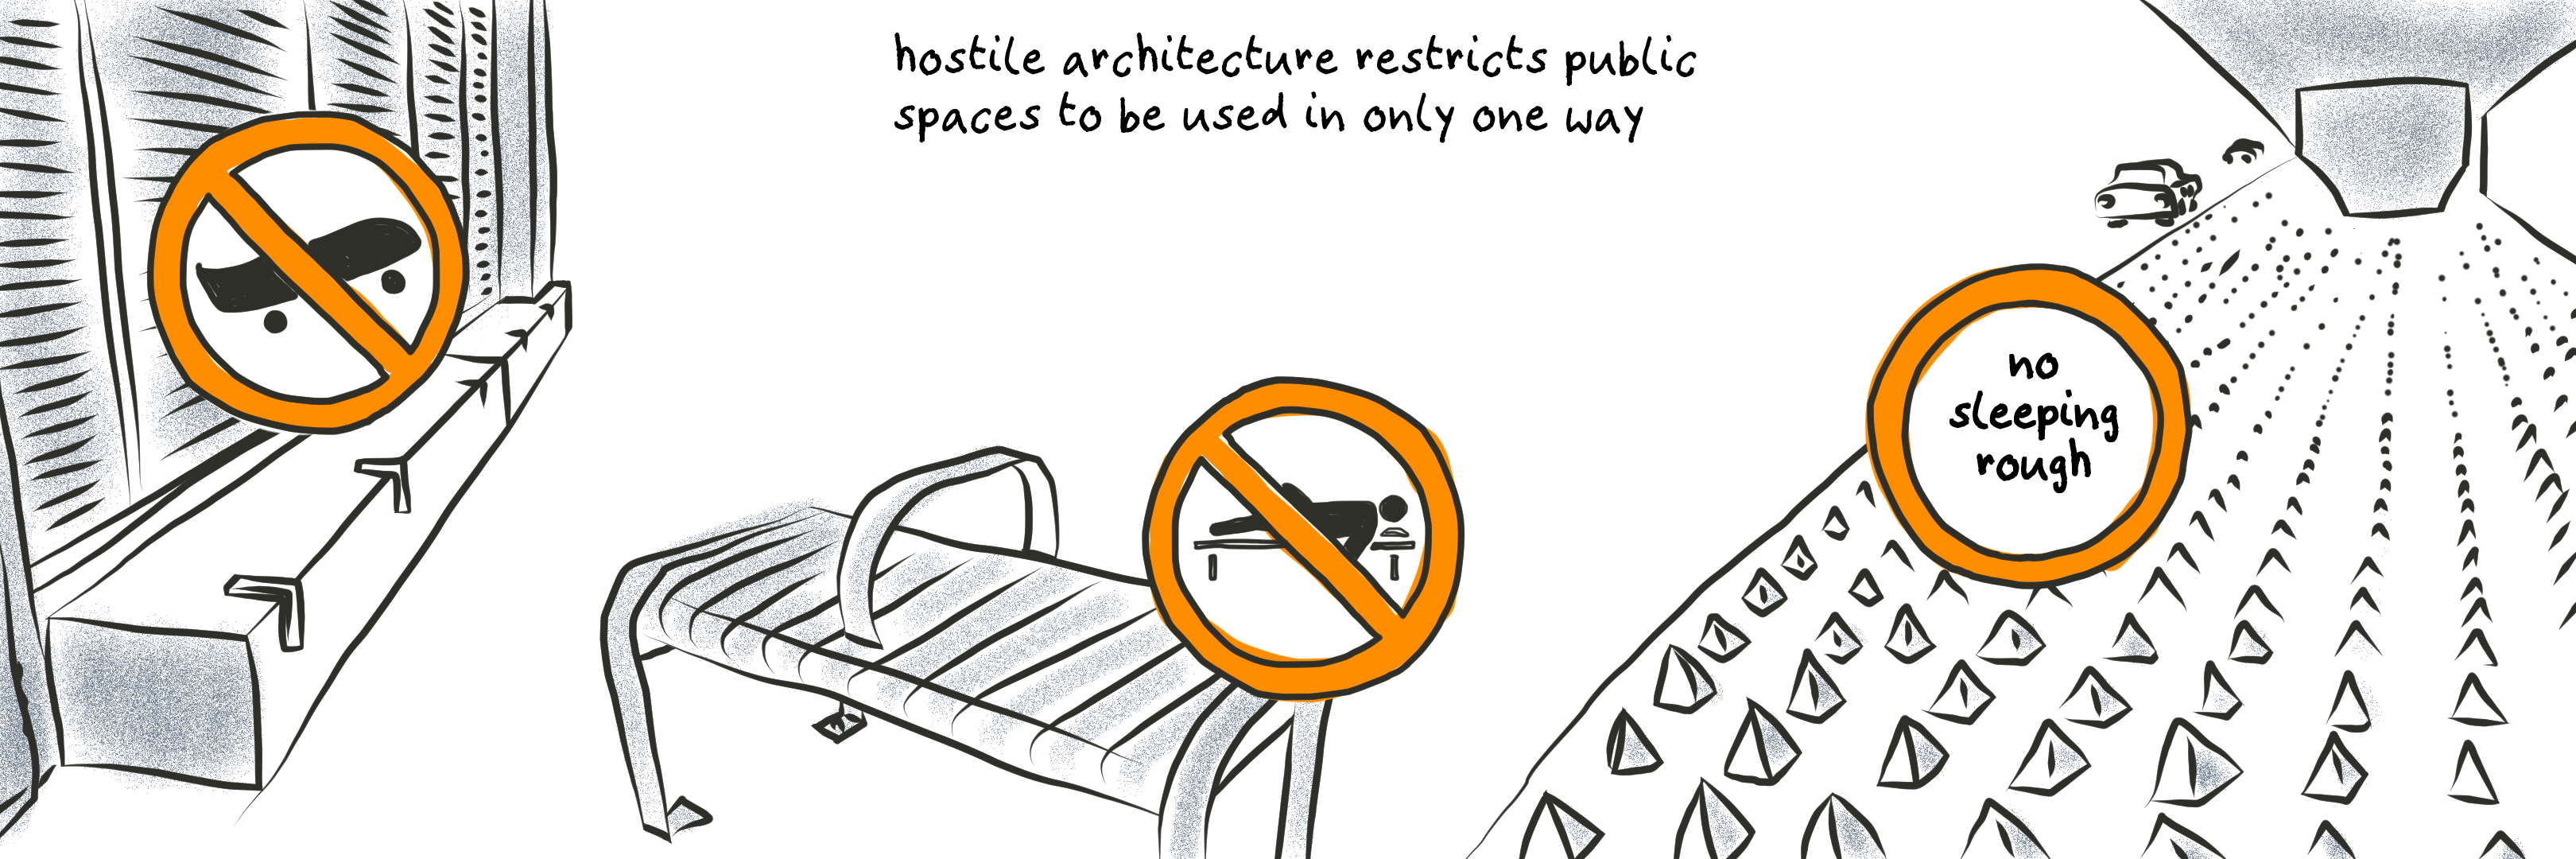 A wide strip excerpt from the comic, digitally drawn in black on white with some orange and indigo accents. Text at the top reads: »hostile architecture restricts public spaces to be used in only one way«. Left) The facade of an office building, anti-skateboard elements are fastened to the concrete benches in front. Overlayed a warning sign with a crossed out skateboard. Middle) A bench that as an armrest right across the middle. Overlayed a warning sign with an crossed out icon of a person lying down.  Right) An inner city overpass with spikes installed underneath. A warning sign reads »no sleeping rough«.